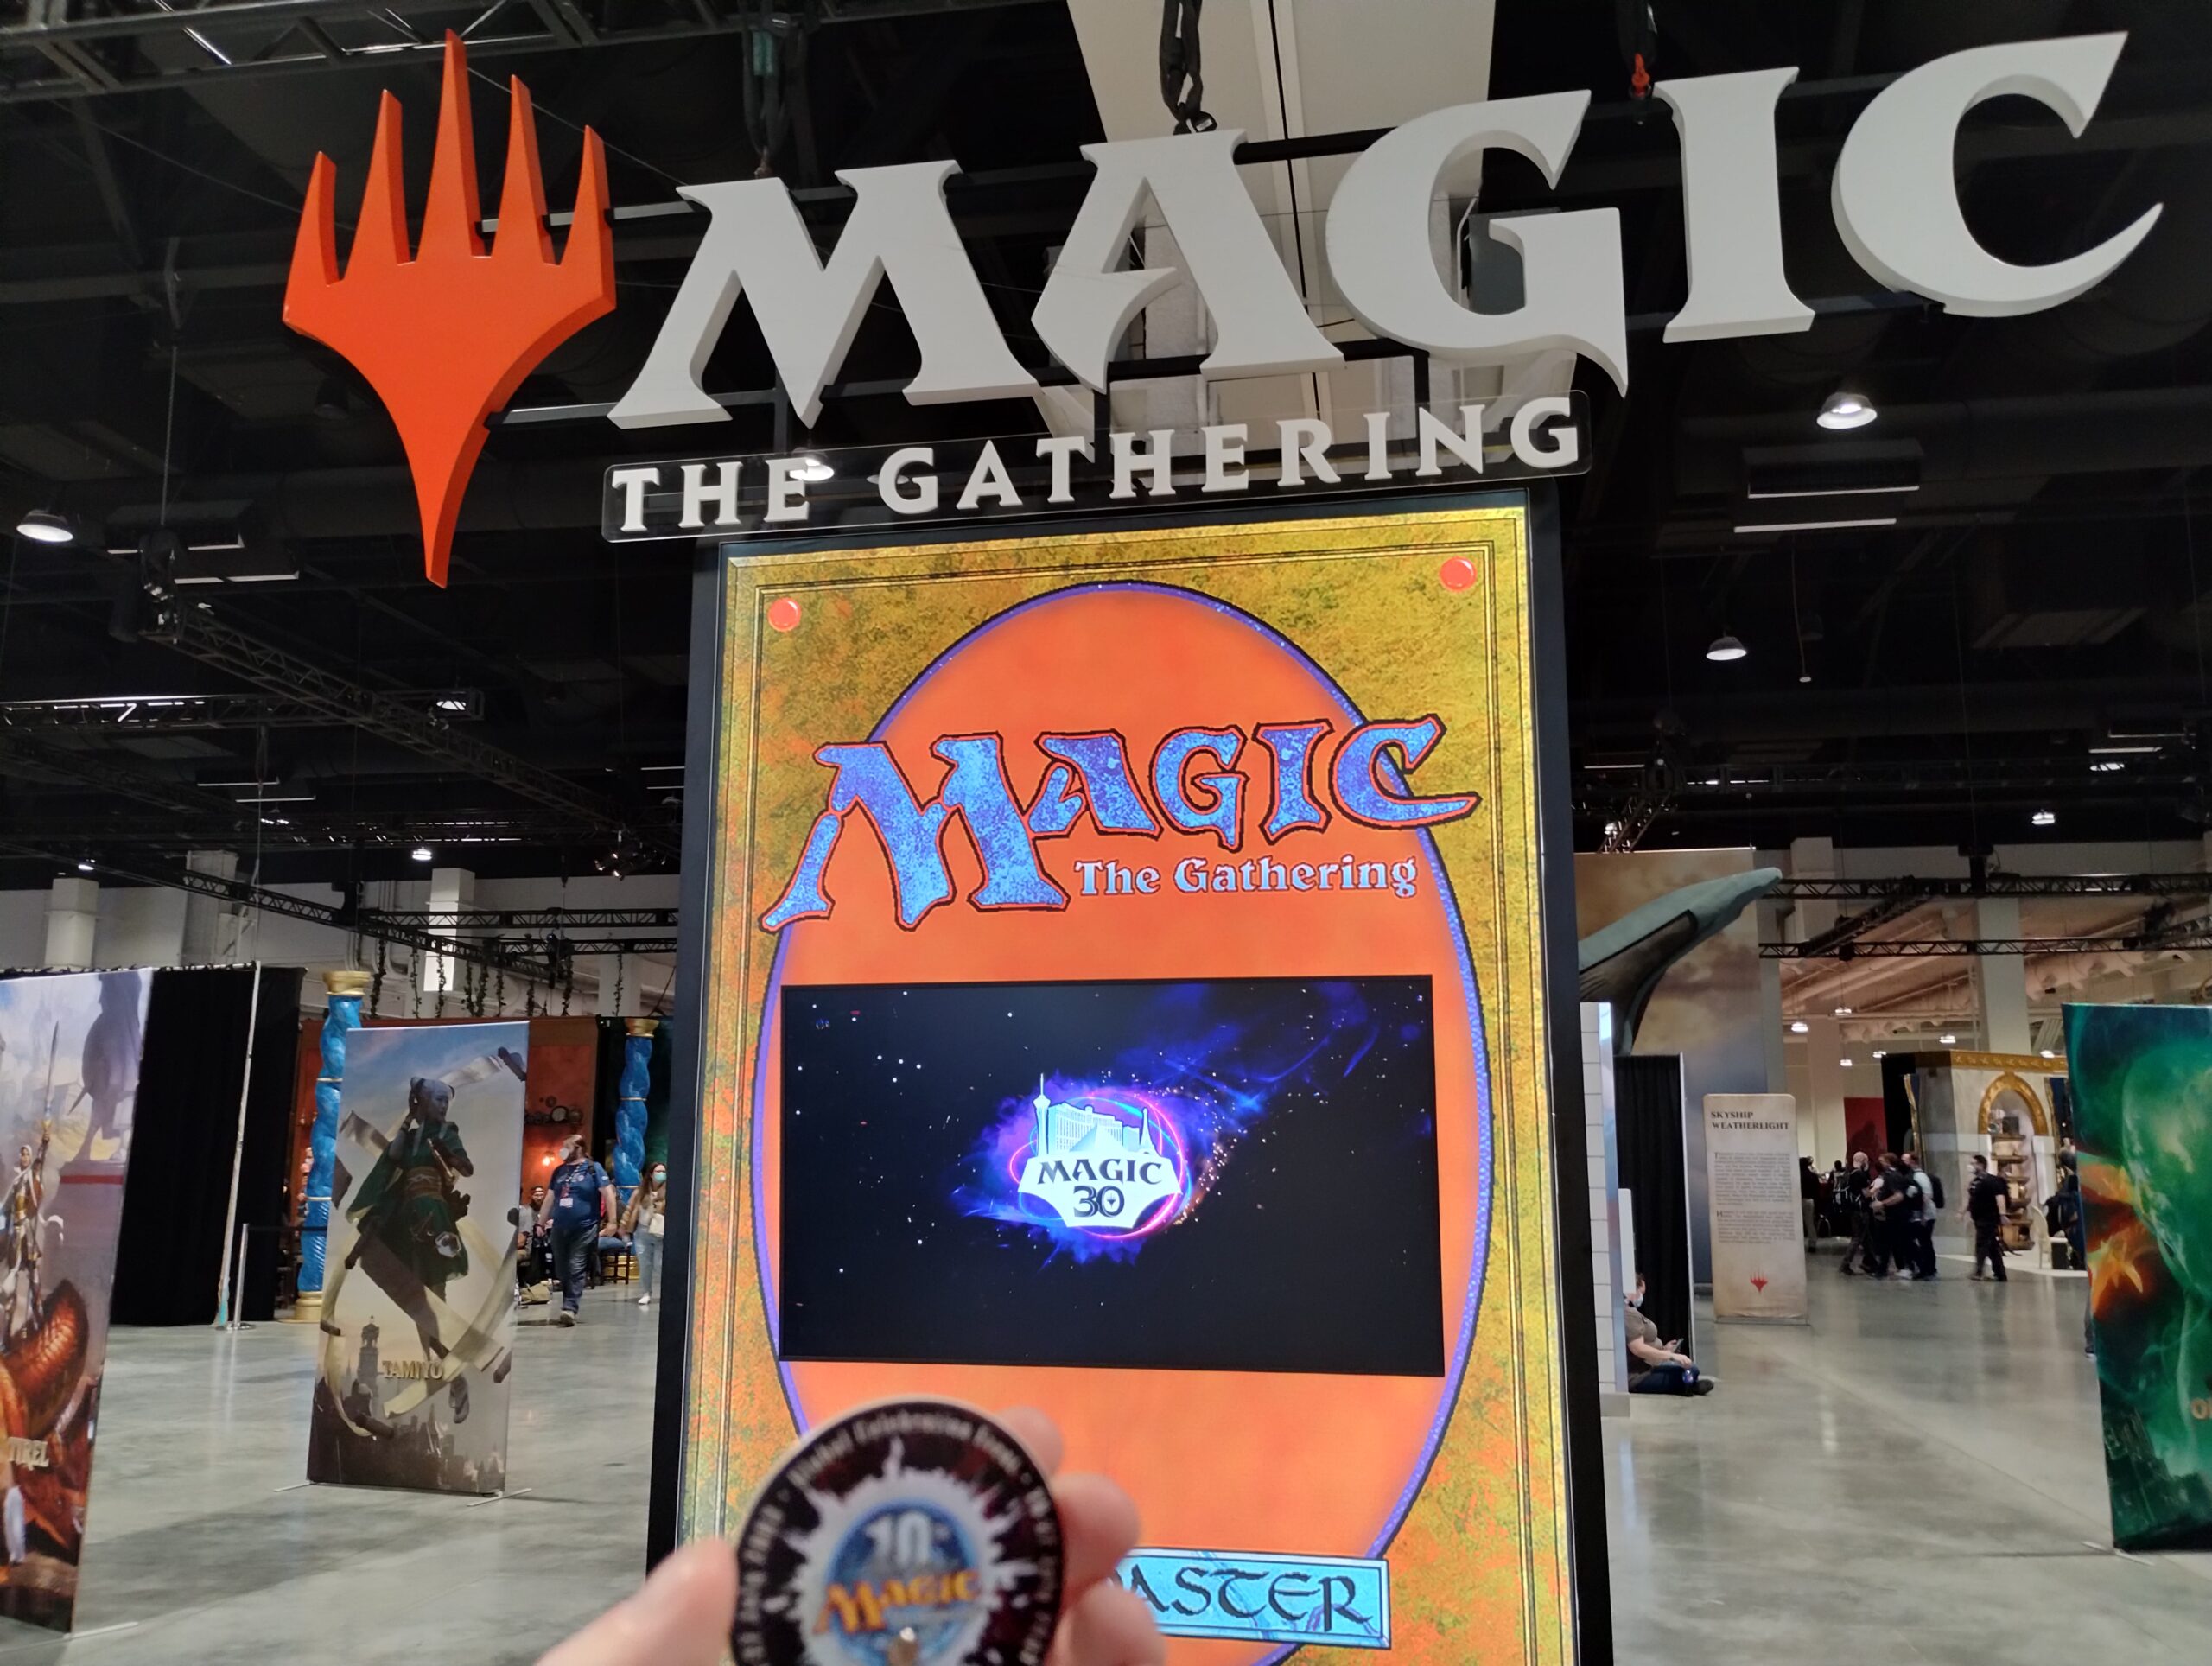 Holding my 10th Anniversary Life Counter at the entrance of Magic30.